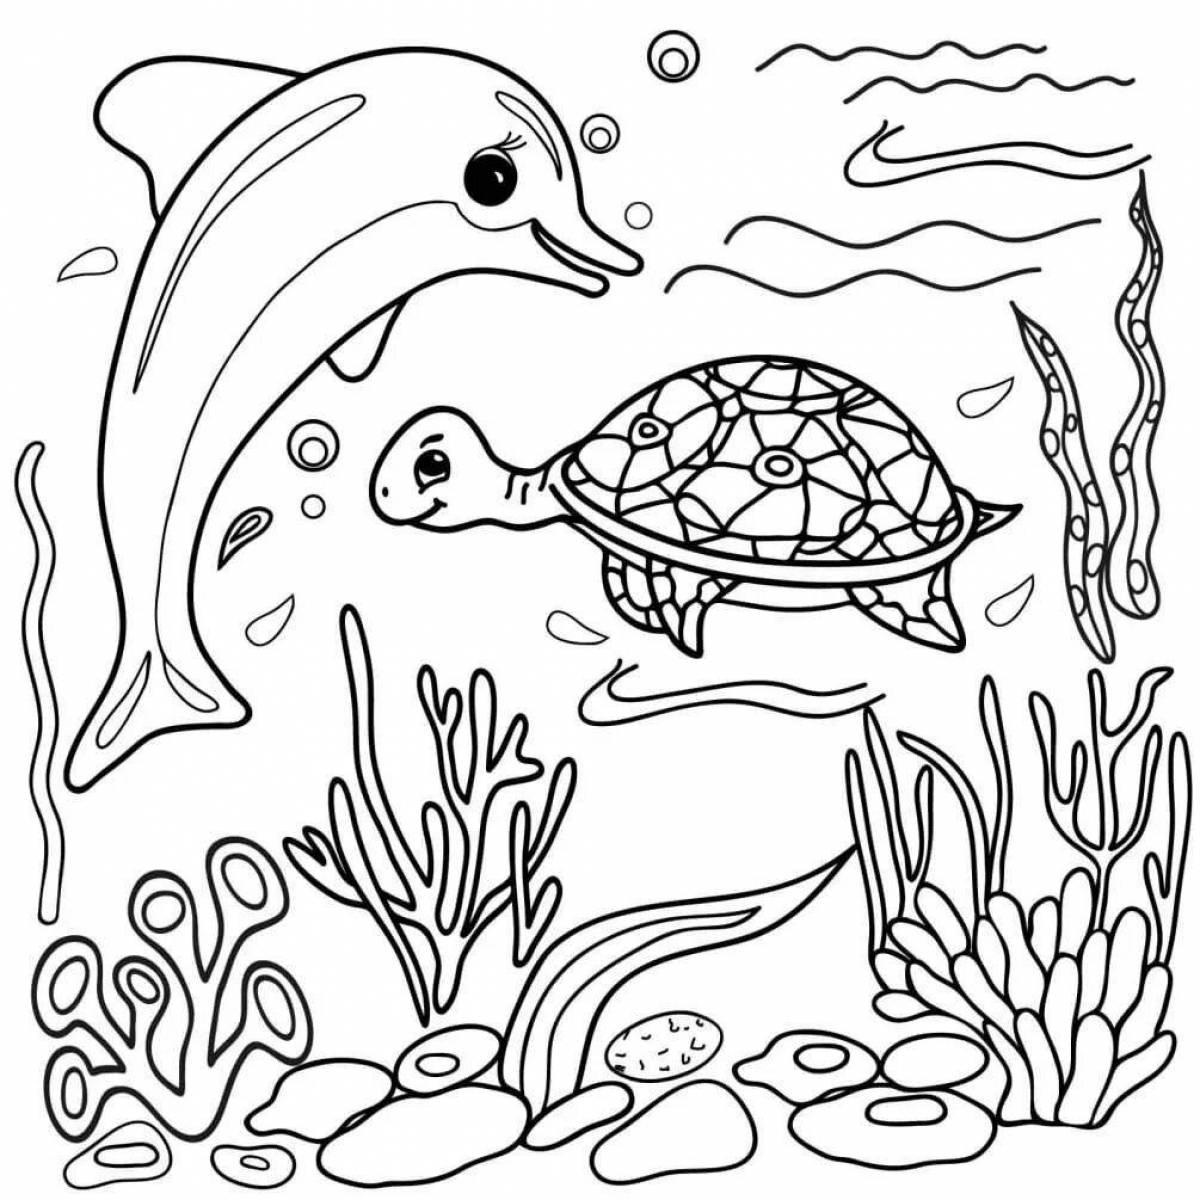 Shining Sea coloring book for 6-7 year olds